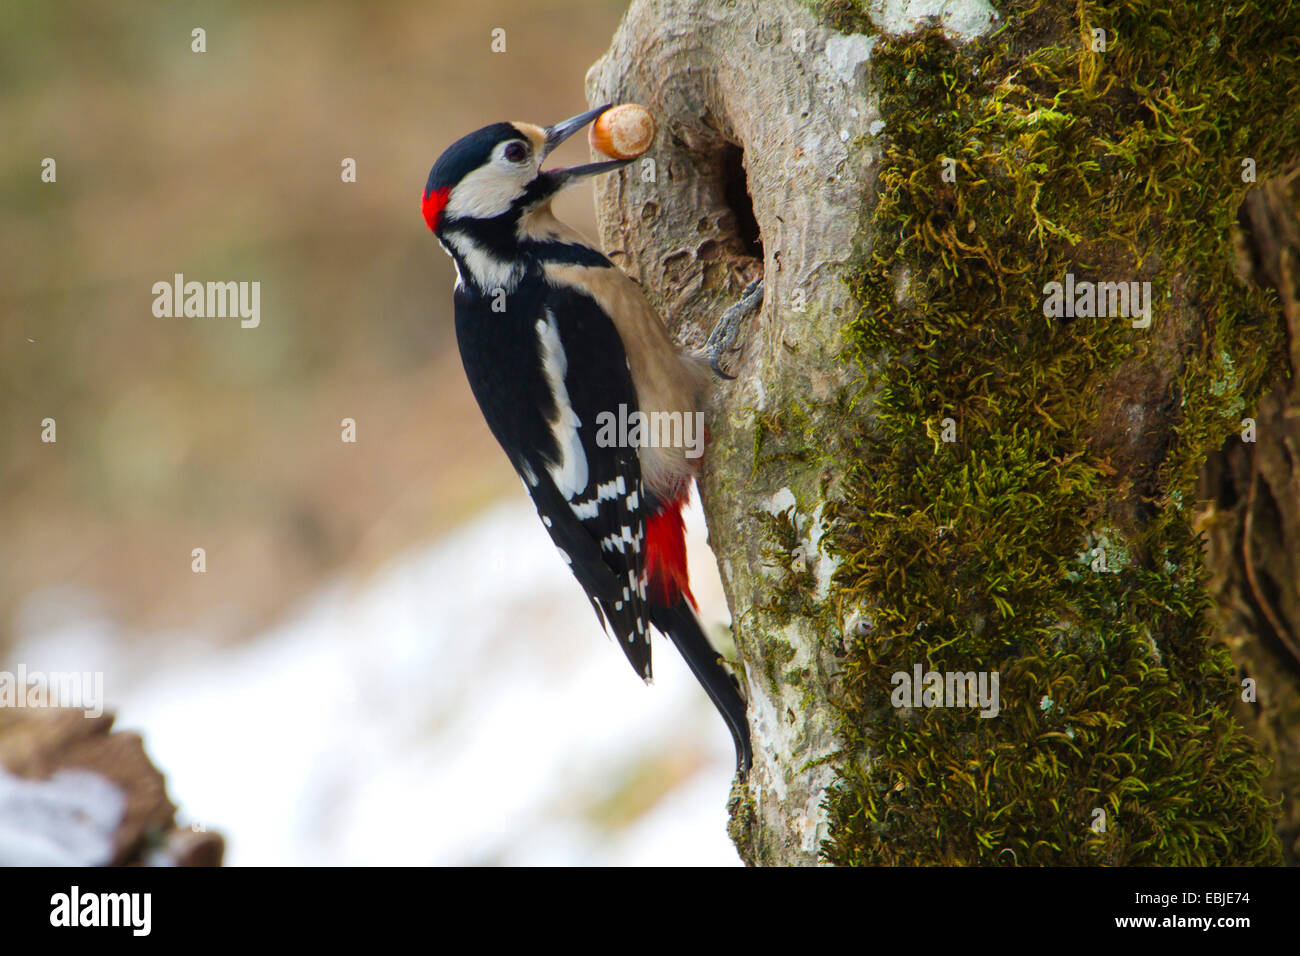 Great spotted woodpecker (Picoides major, Dendrocopos major), at a tree trunk with a hazelnut in its beak, Switzerland, Sankt Gallen Stock Photo